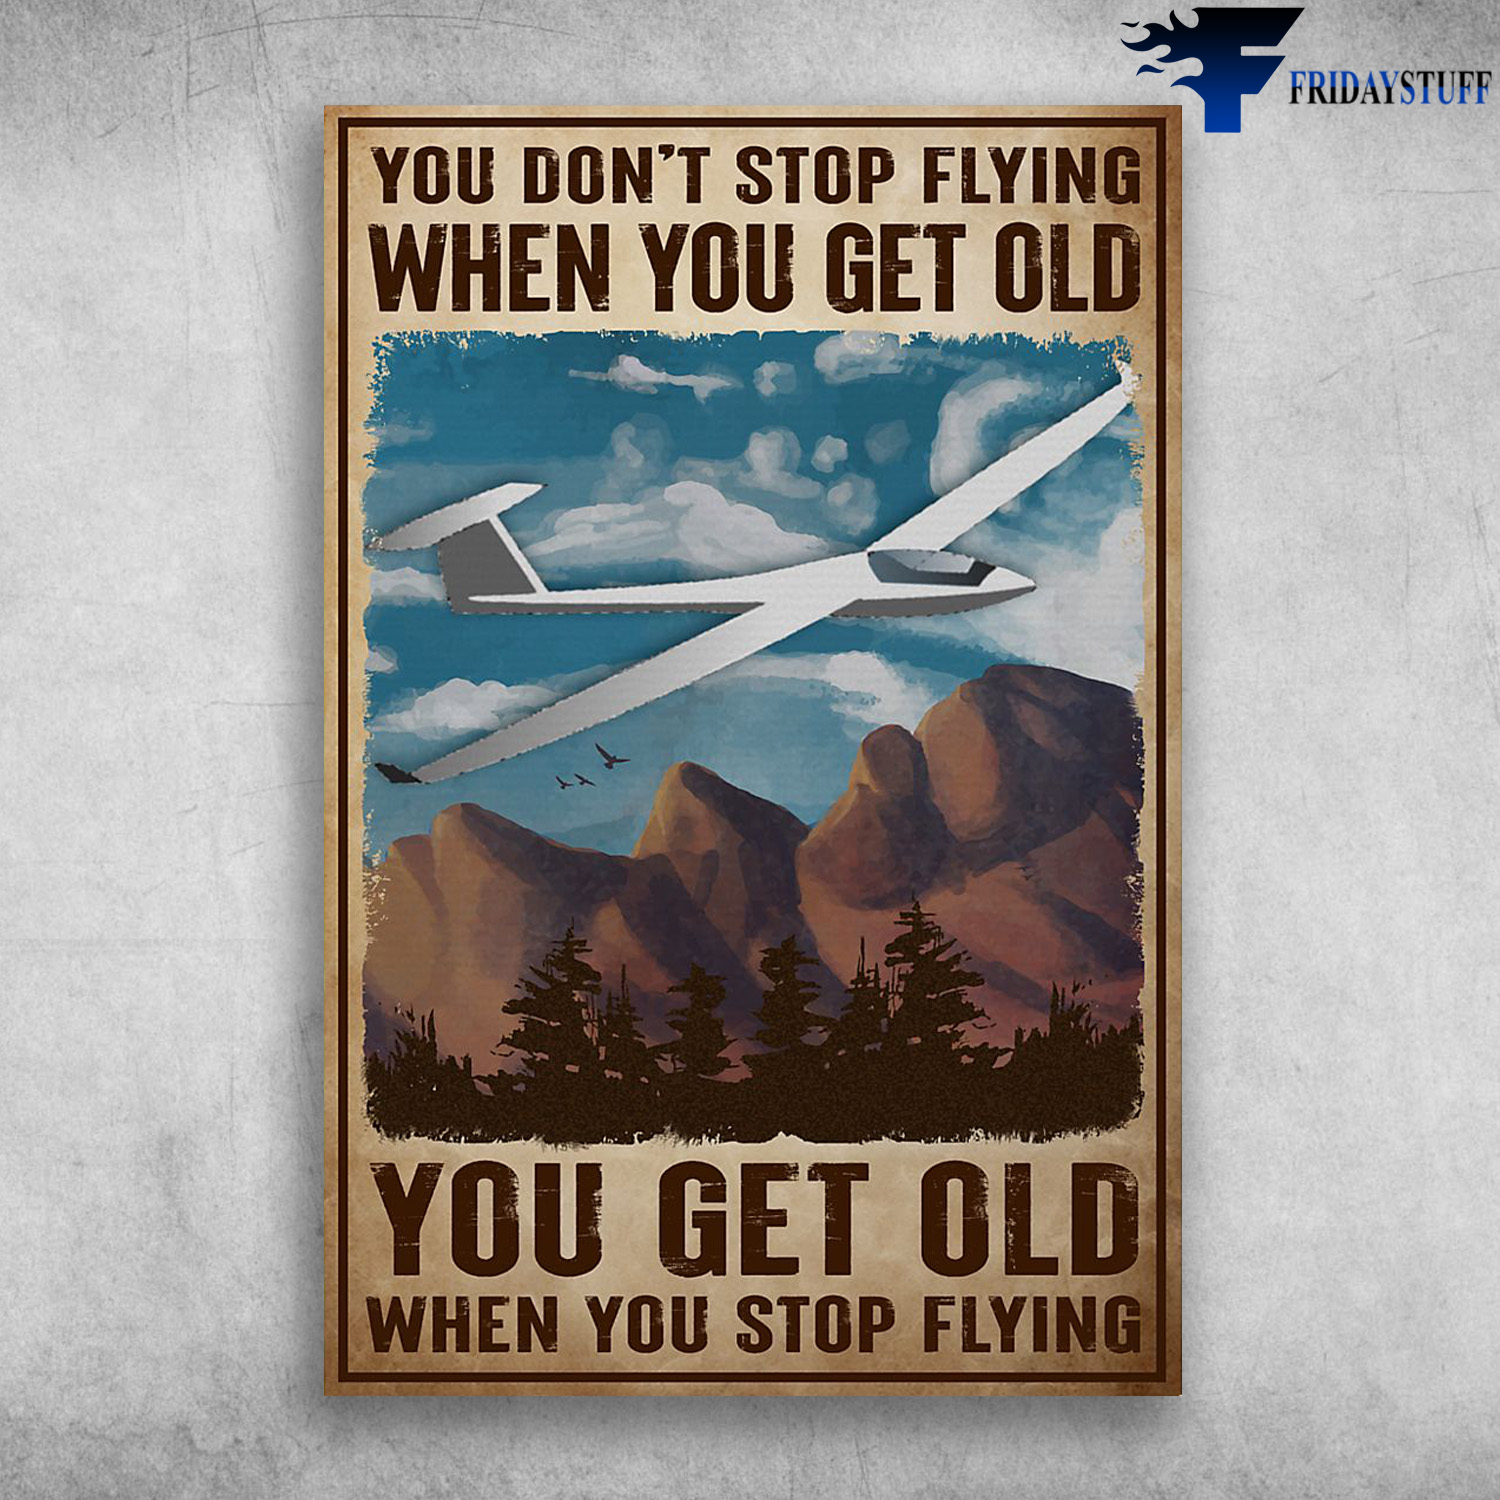 Gliding On The Plane - You Don't Stop Flying When You Get Old, You Get Old When You Stop Flying